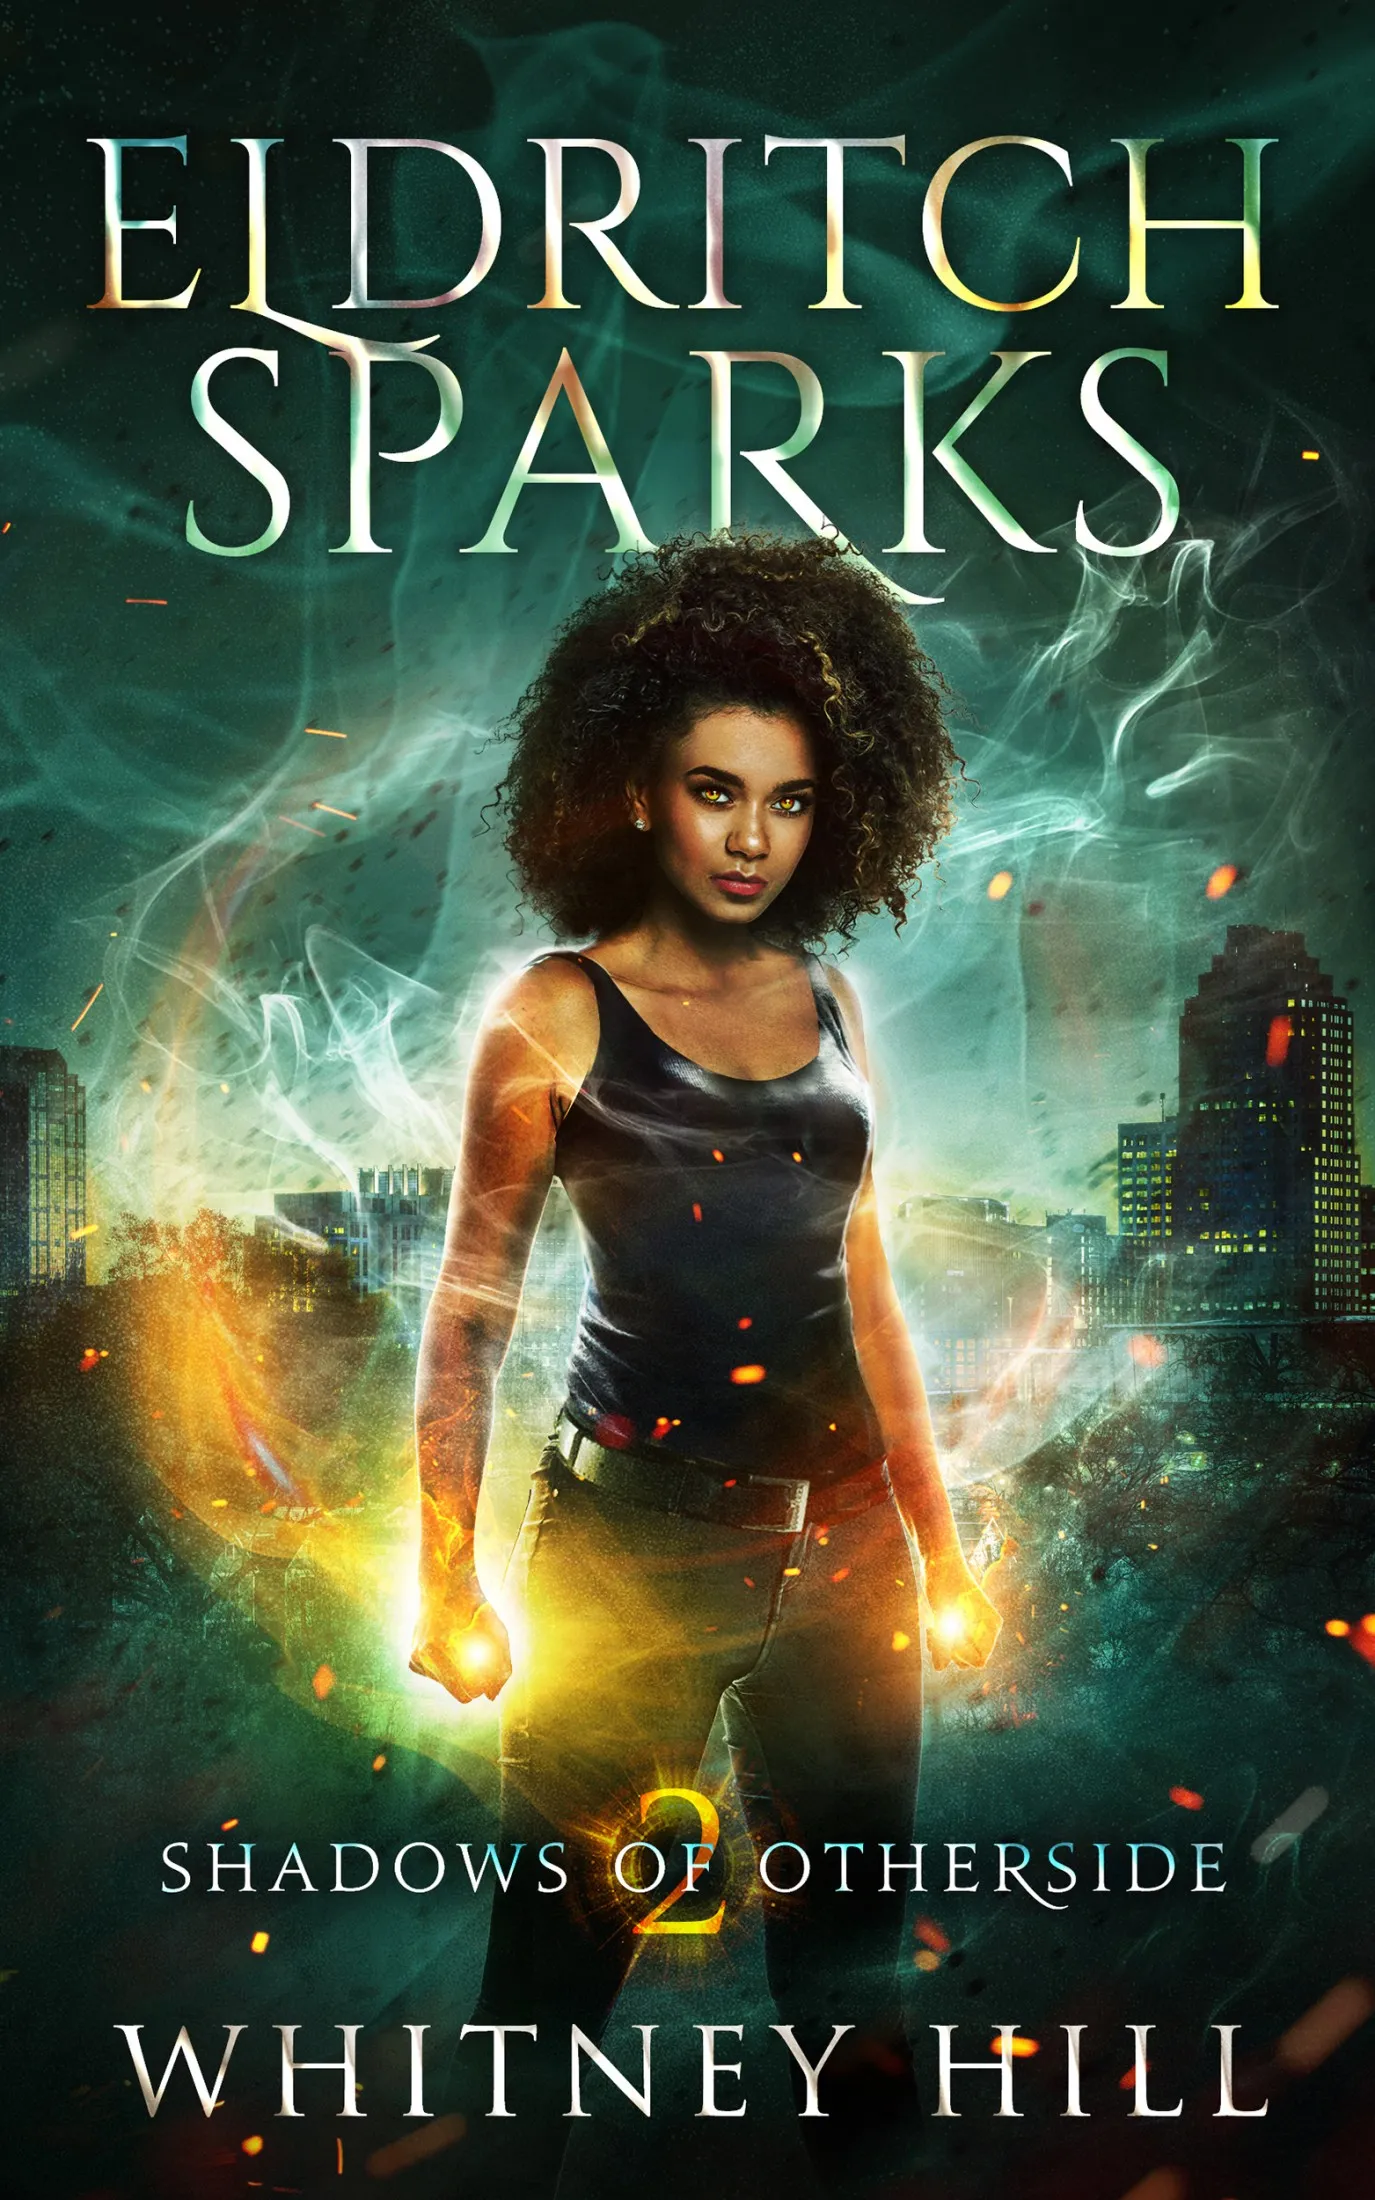 Eldritch Sparks (Shadows of Otherside #2)